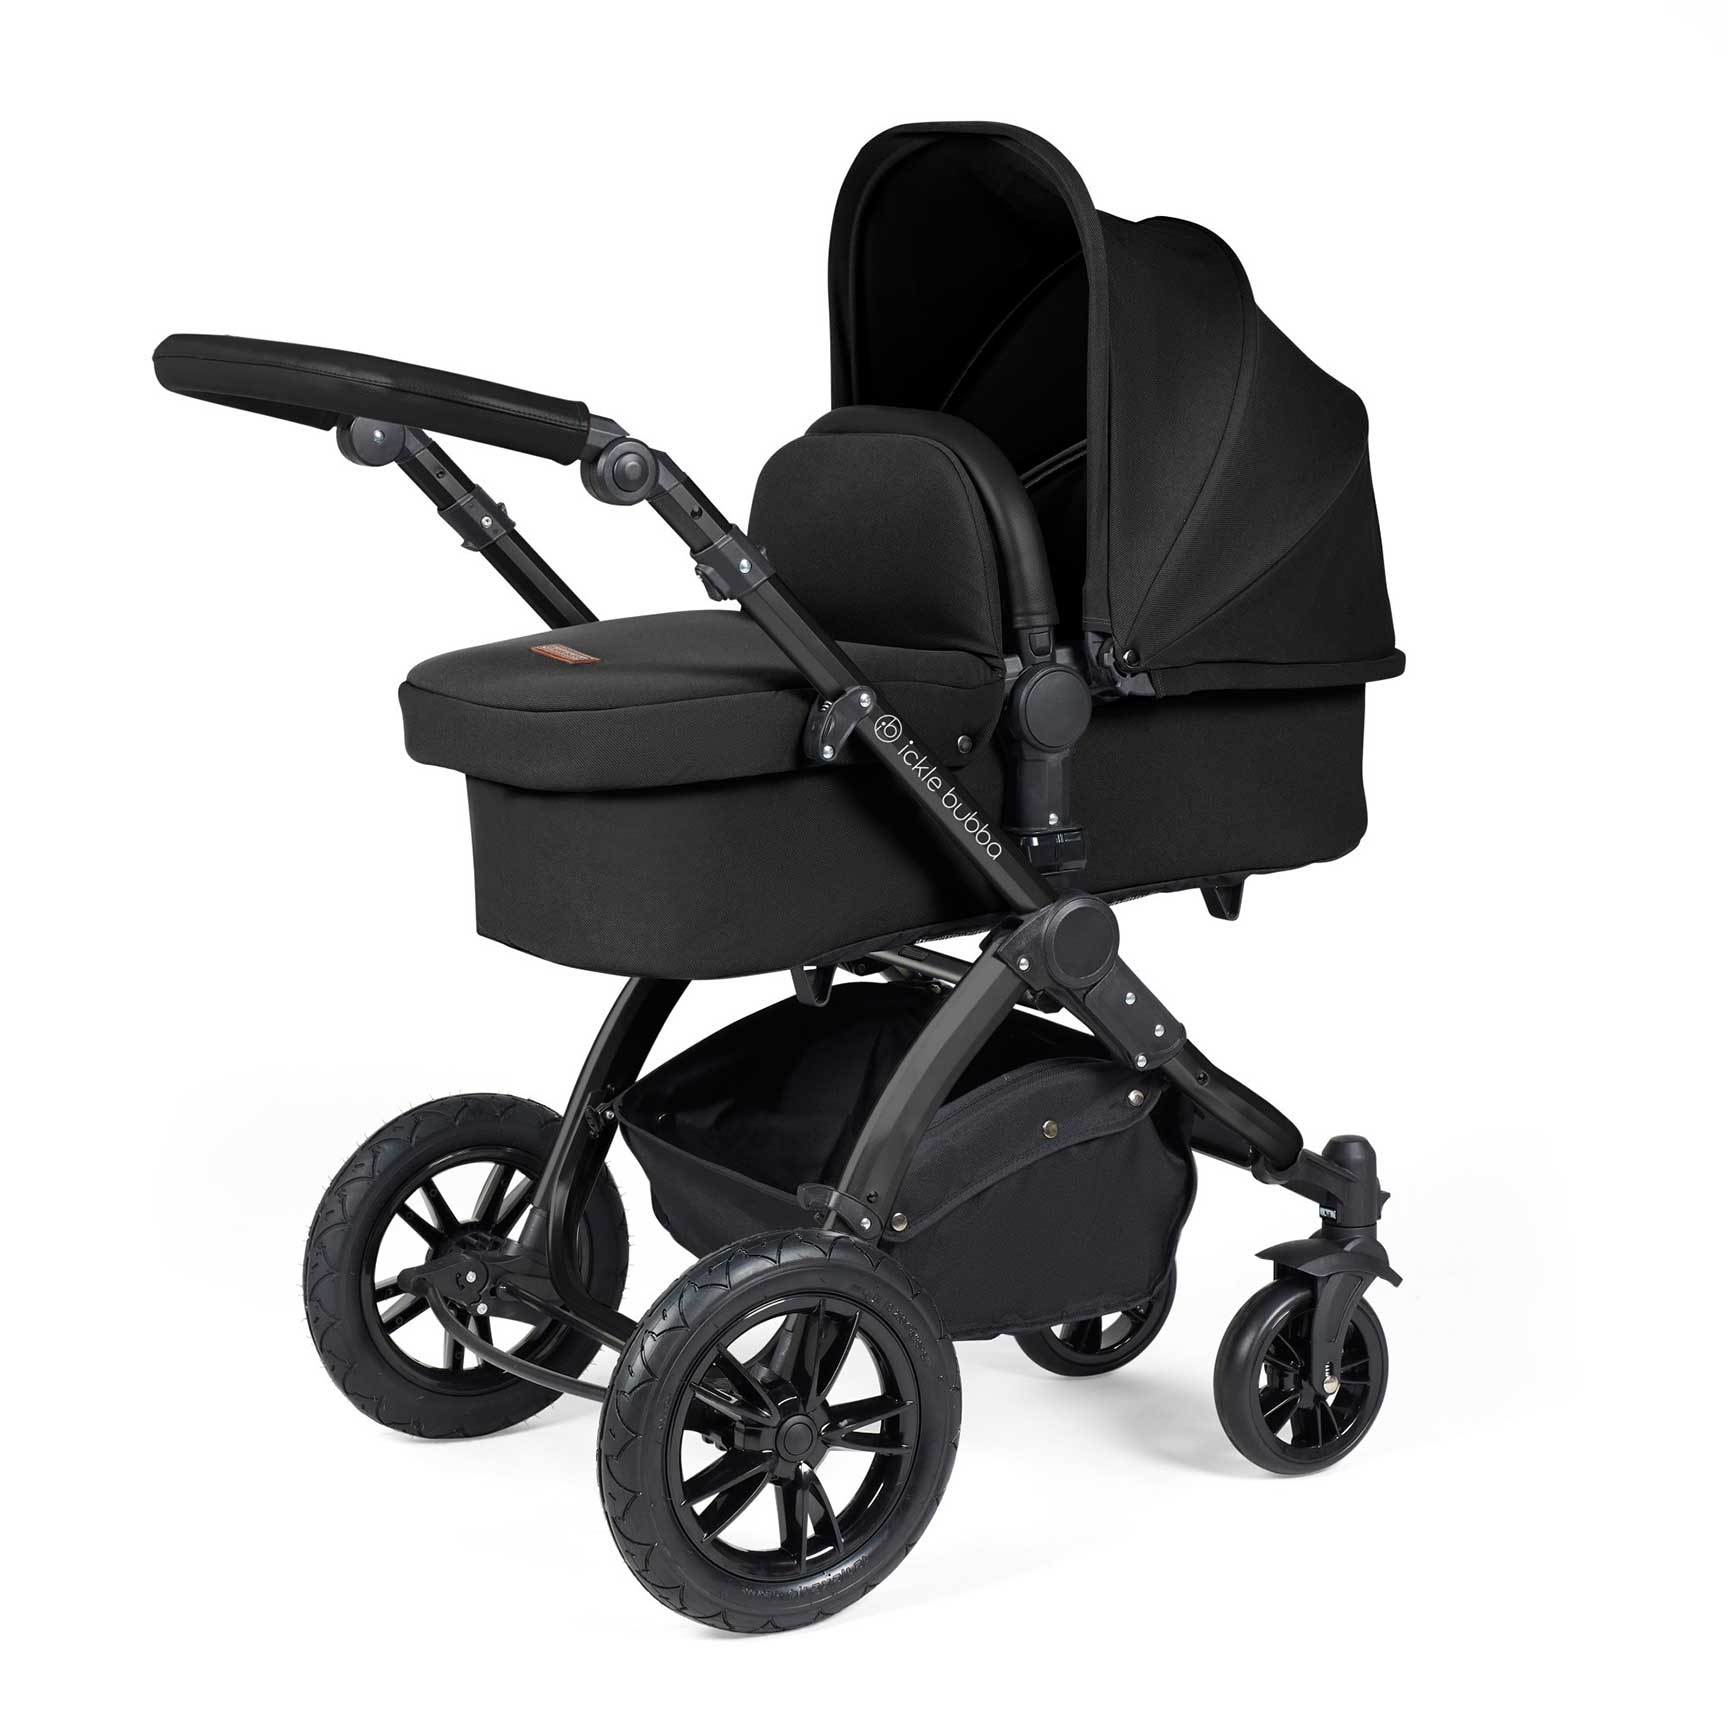 Ickle Bubba travel systems Ickle Bubba Stomp Luxe All-in-One Travel System with Isofix Base - Black/Midnight/Black 10-011-300-202